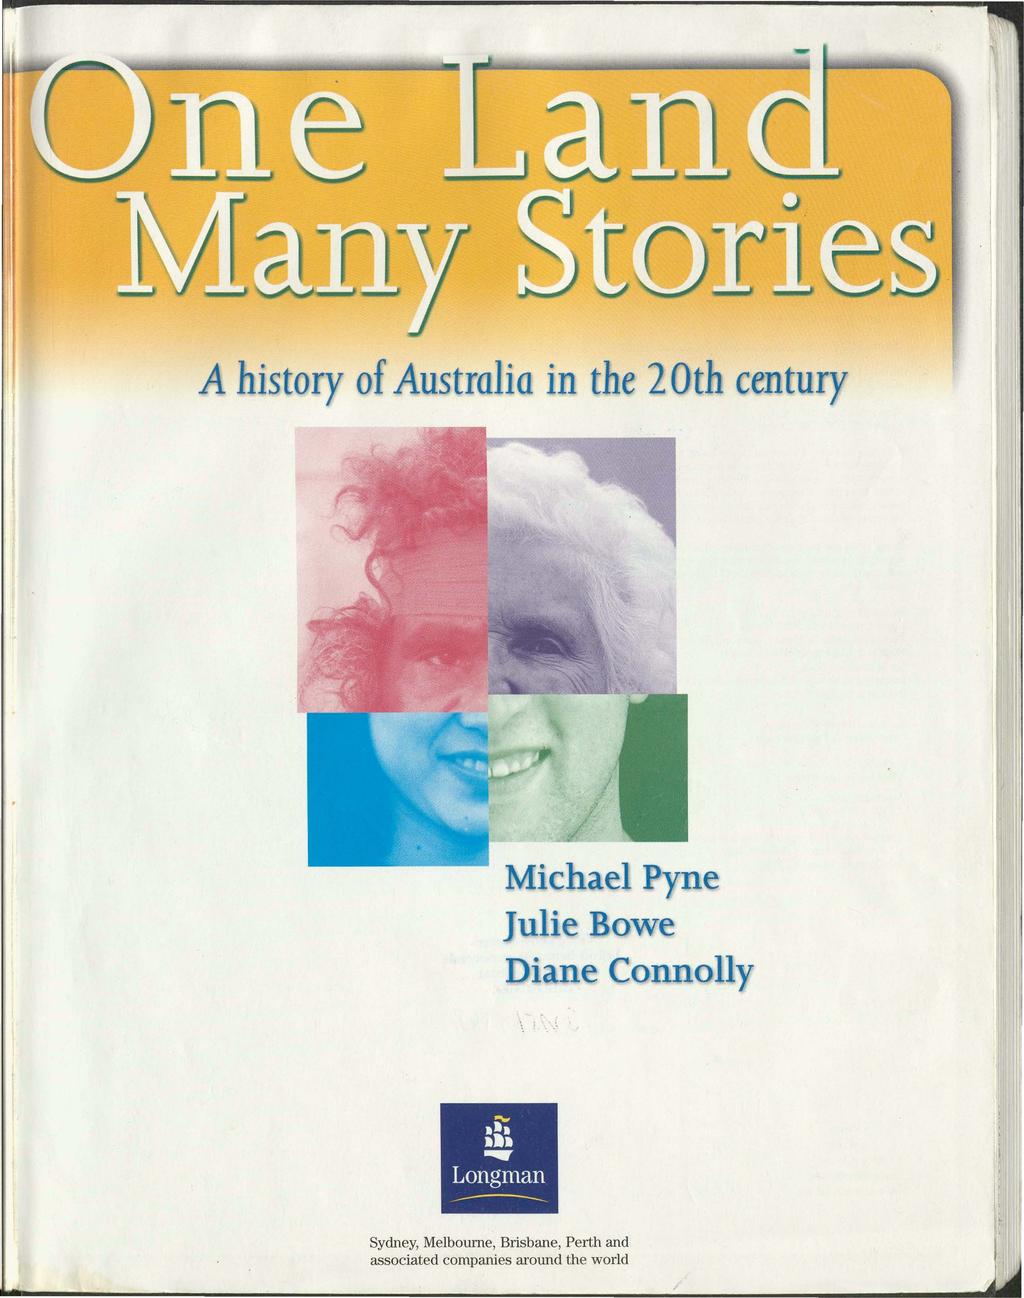 A history of Australia in the 2 Oth century Michael Pyne Julie Bowe Diane Connolly \ ;.